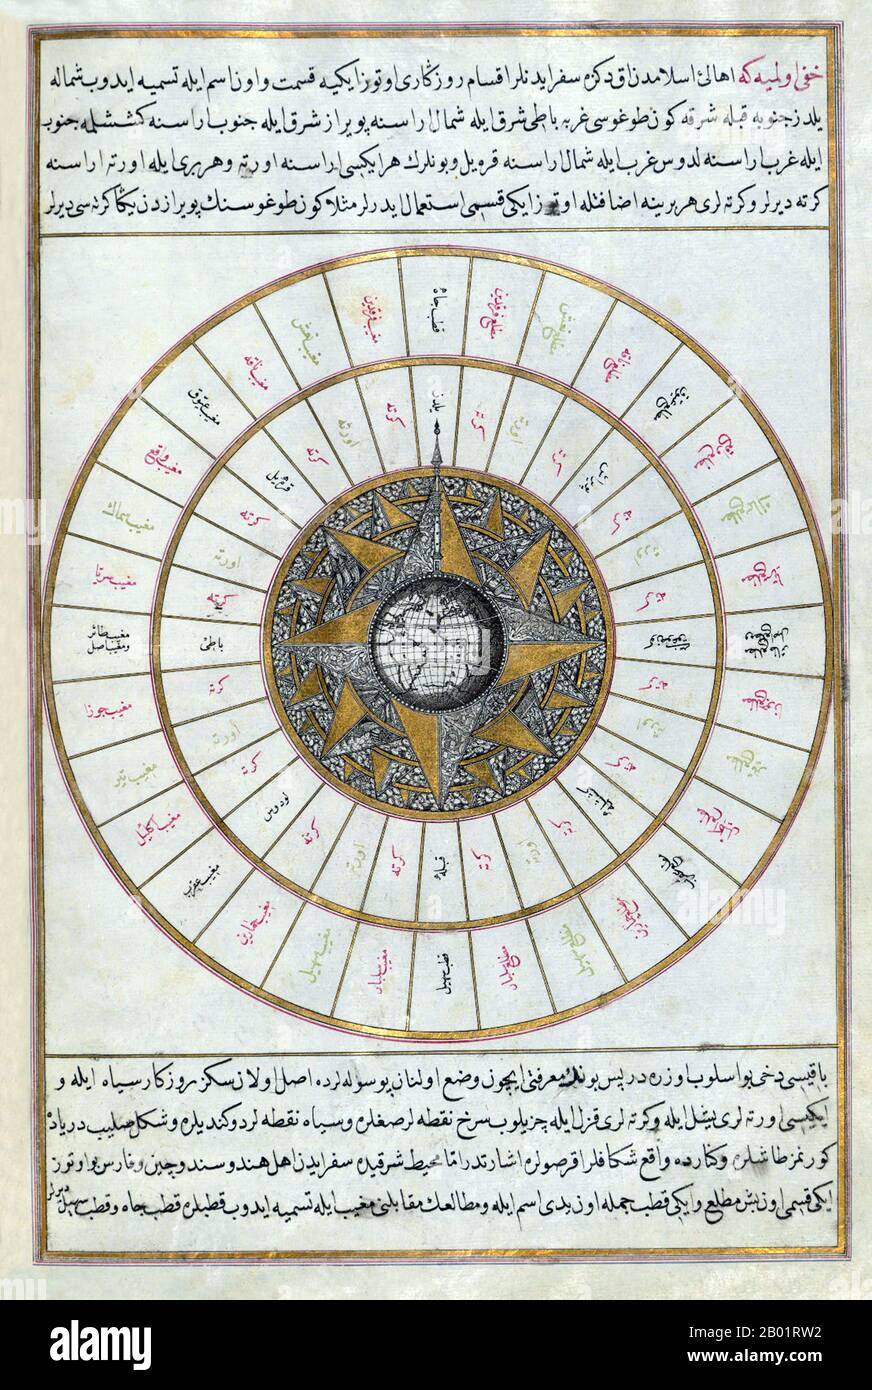 Turkey: 'Western Hemisphere Within a Windrose'. Folio from an Ottoman navigation guide by Piri Reis (c. 1470-1554), early 17th century.  Piri Reis (full name Haji Ahmed Muhiddin Piri; Reis was a Turkish military rank equivalent to that of captain) was an Ottoman admiral, geographer and cartographer. He is primarily known today for his maps and charts collected in his Kitab-i Bahriye (Book of Navigation), a book which contains detailed information on navigation, as well as very accurate charts (for its time) describing the important ports and cities of the Mediterranean Sea. Stock Photo